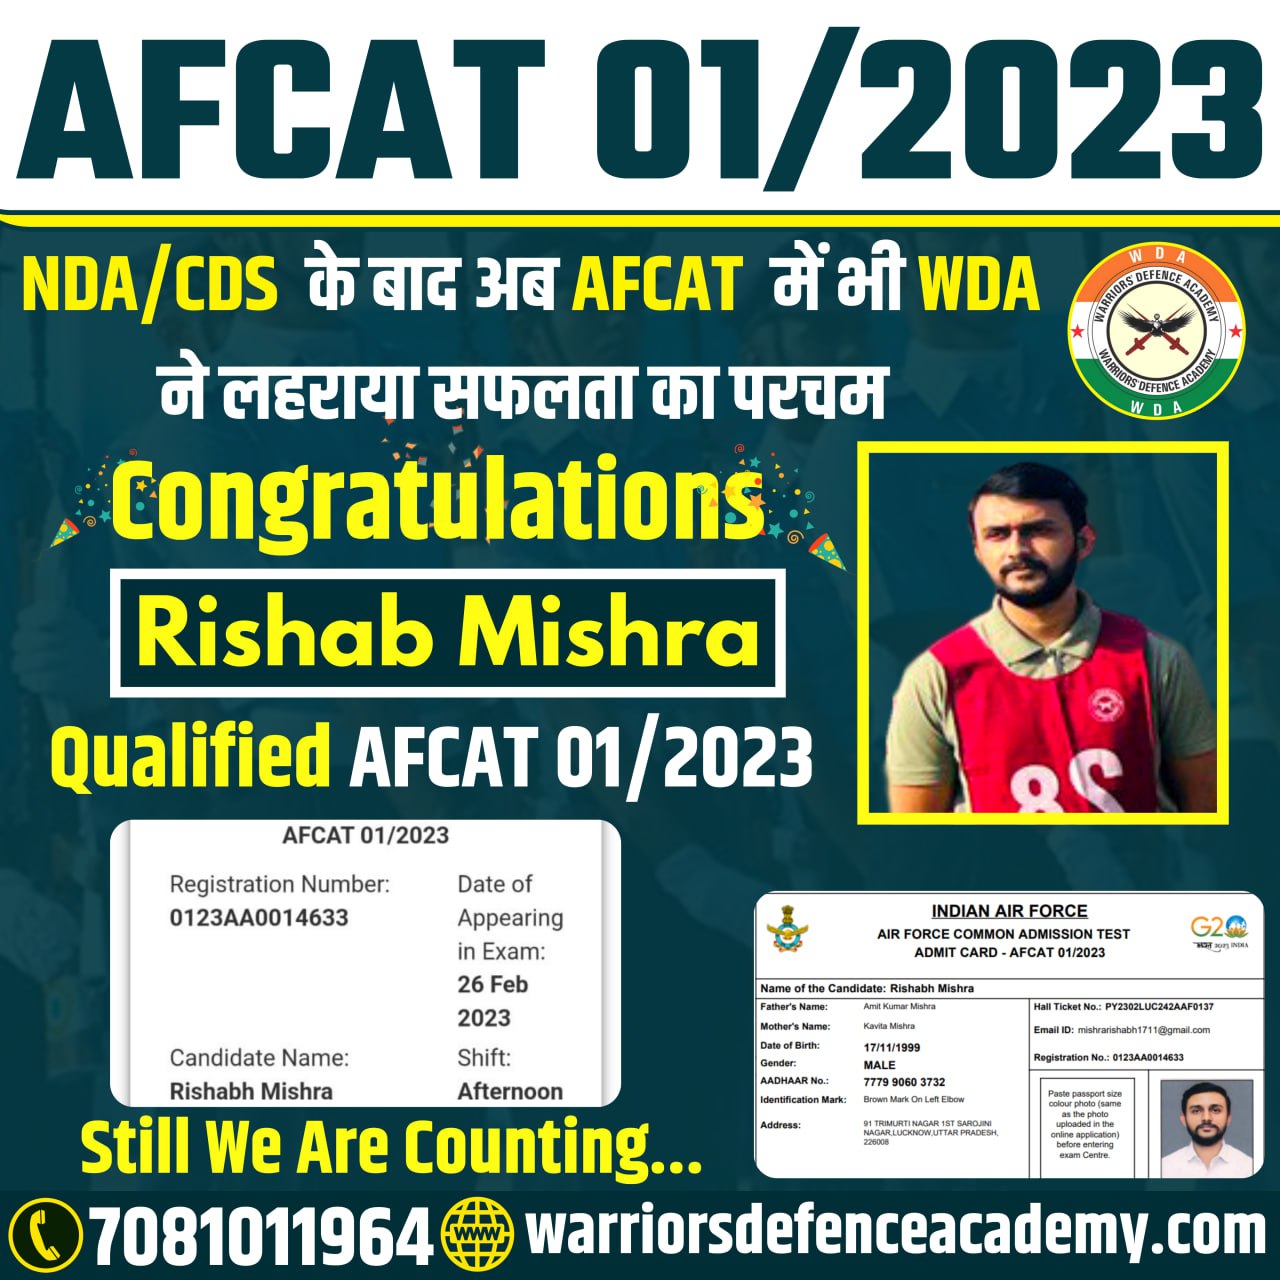 Top NDA Coaching in Lucknow | Best NDA Coaching in Lucknow | Warriors Defence Academy in India | Warriors Defence Academy | Best NDA Coaching in Lucknow